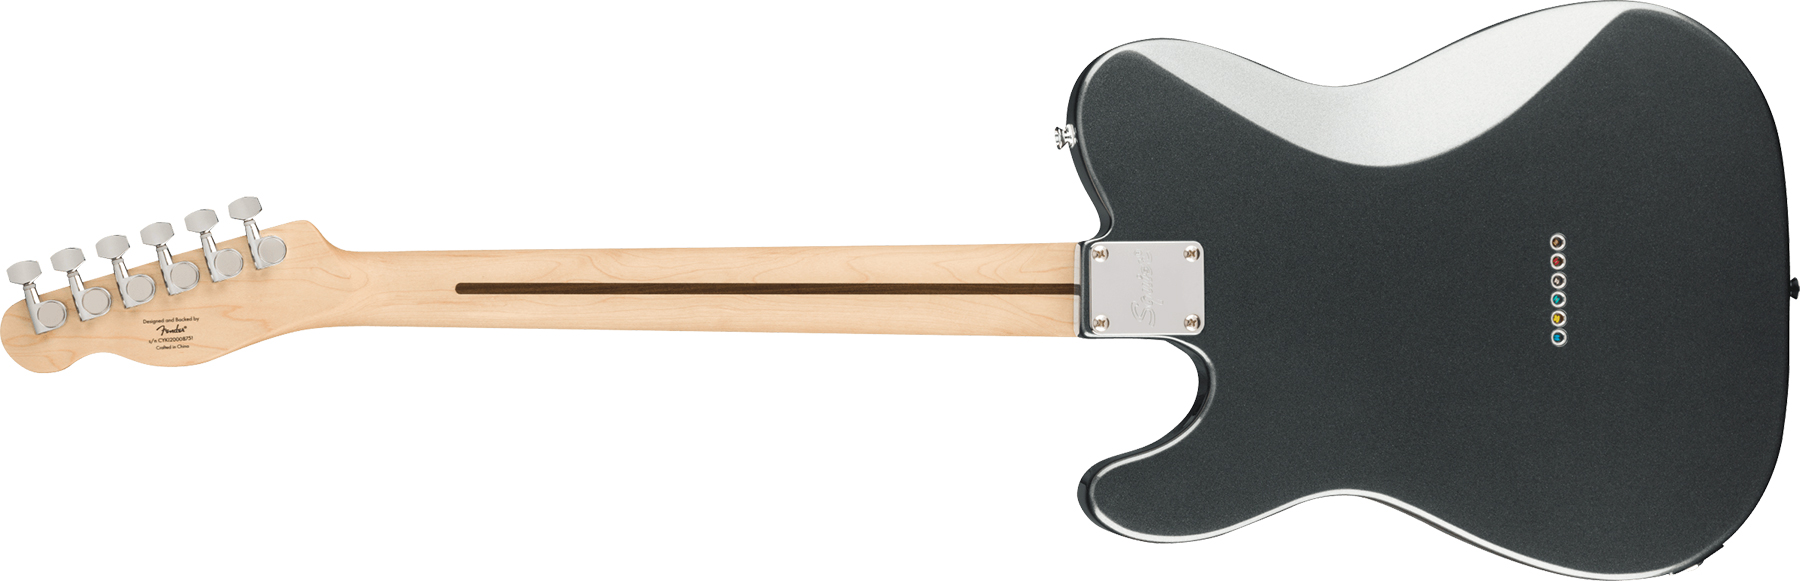 Squier Tele Affinity Deluxe 2021 Hh Ht Lau - Charcoal Frost Metallic - E-Gitarre in Teleform - Variation 1